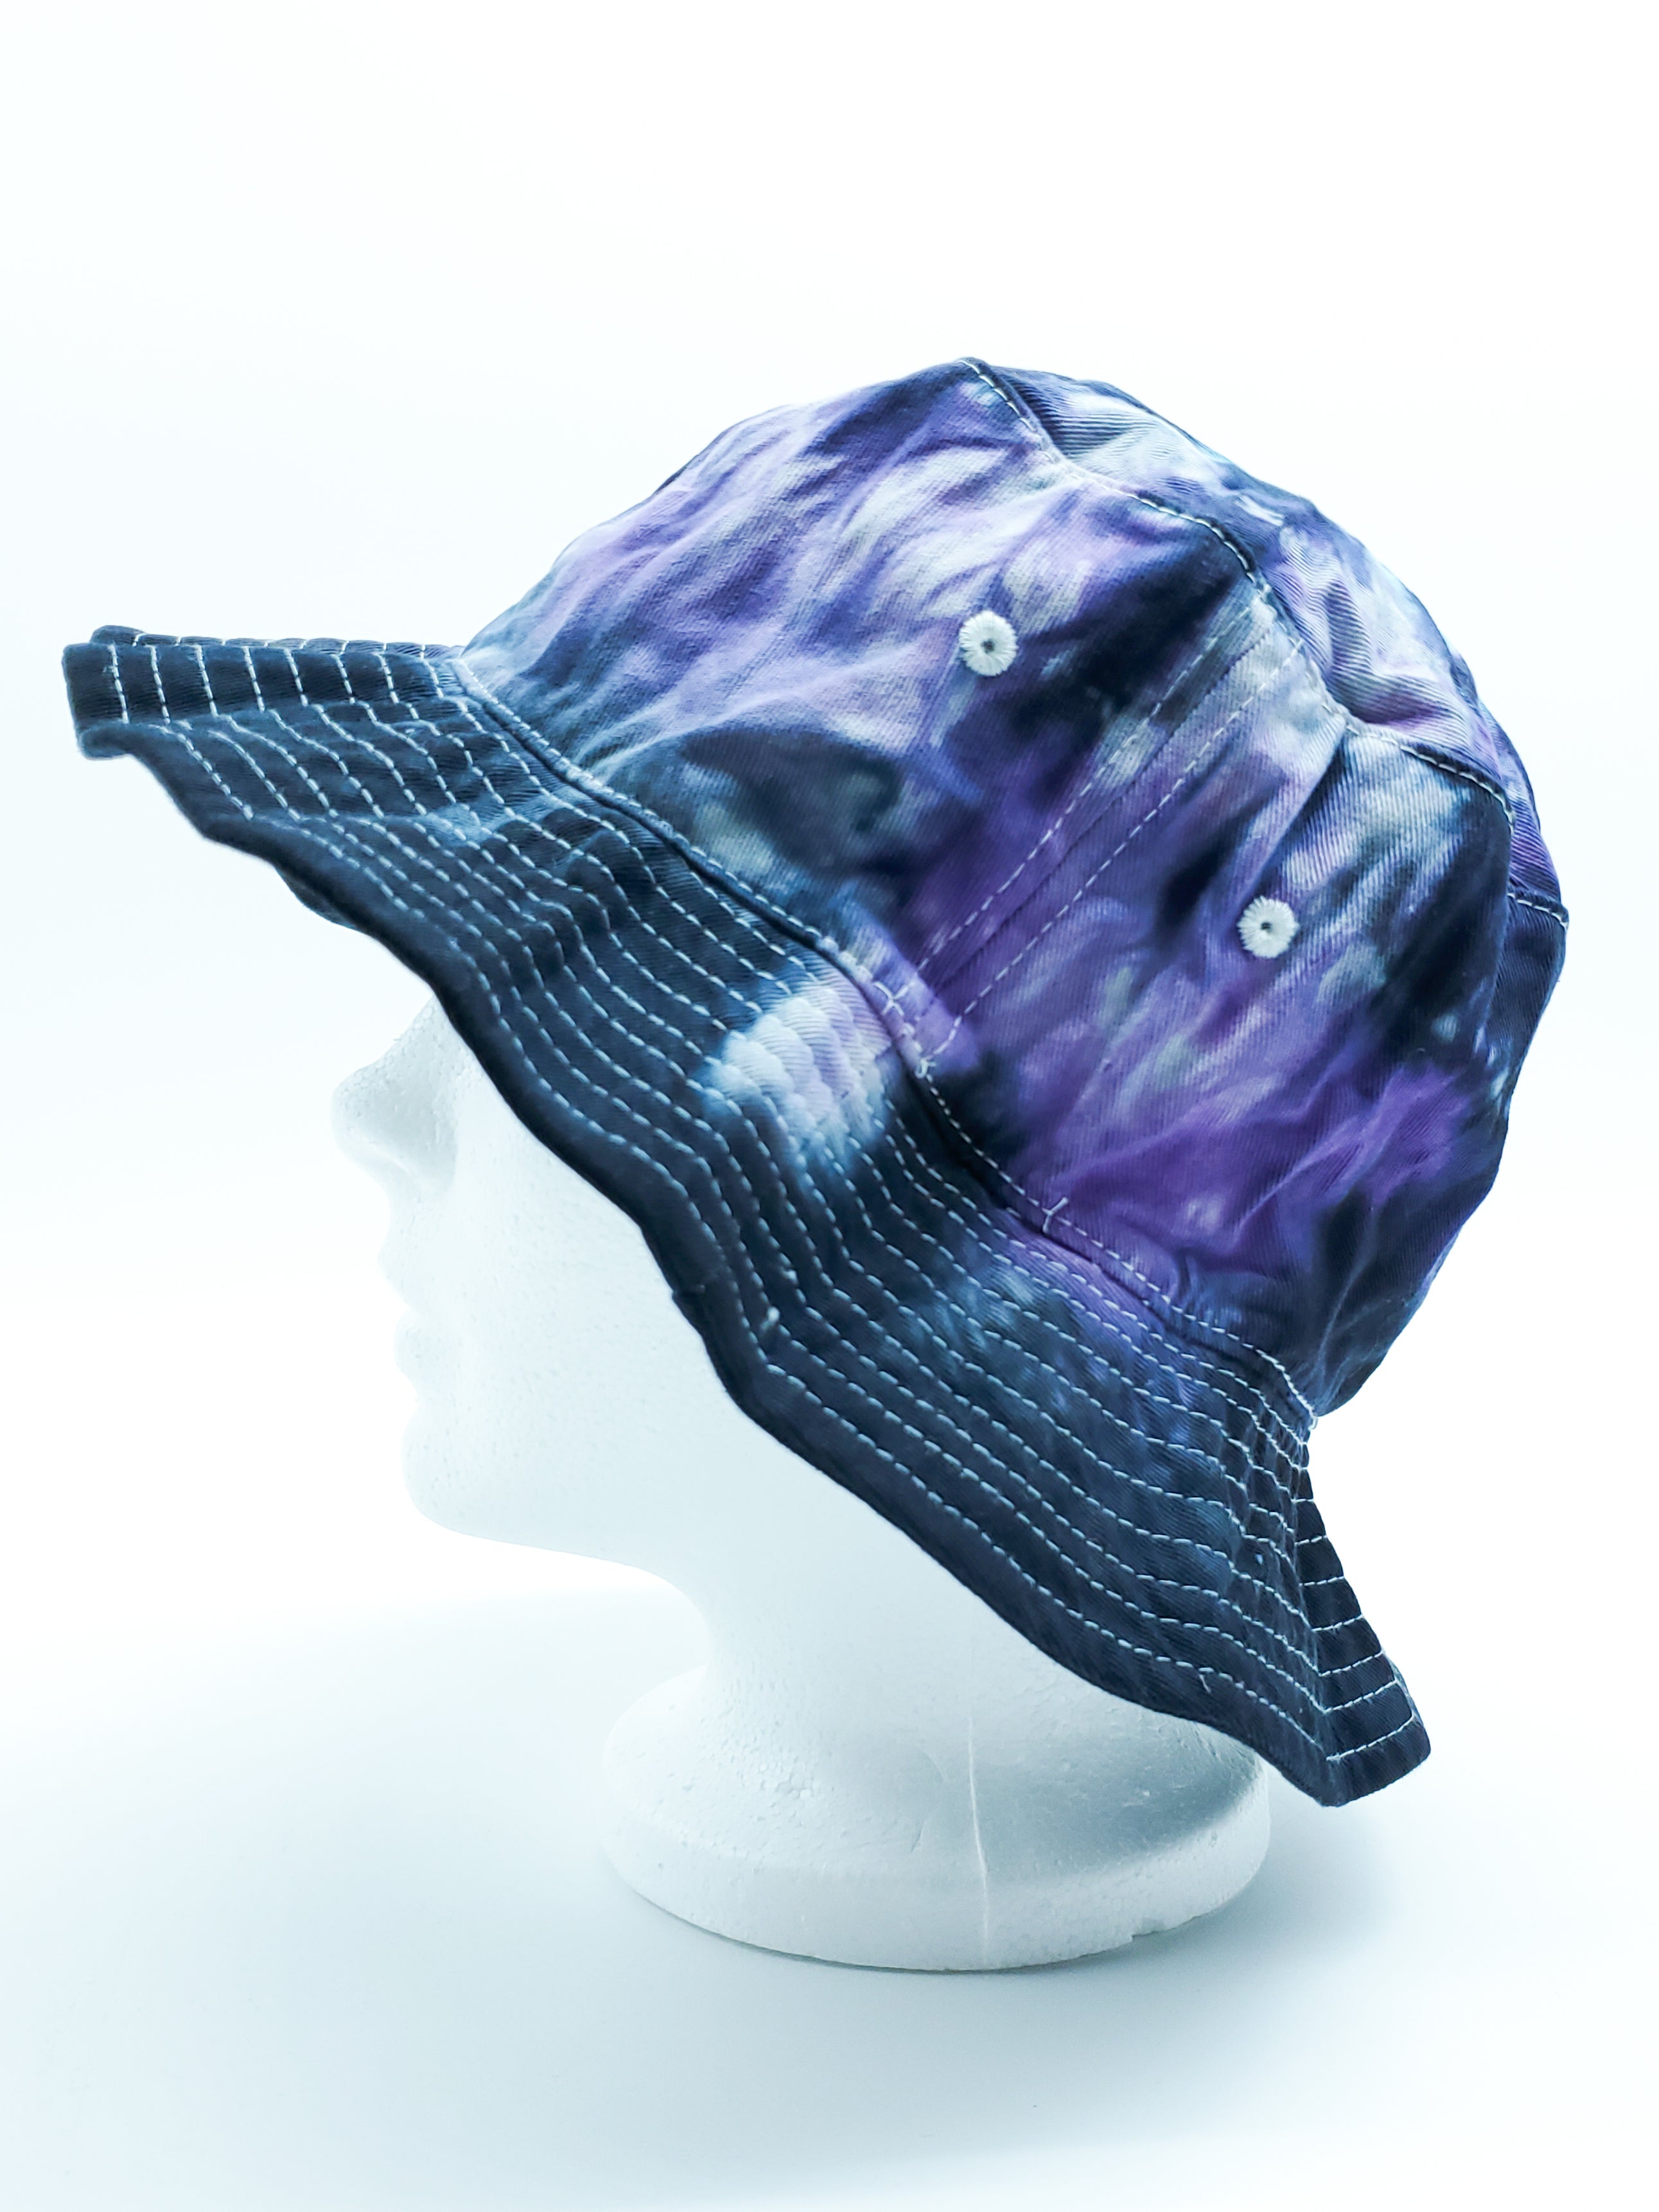 Black, Purple and Peacock Tie Dyed Bucket Hat (Adult, O/S) - The Caffeinated Raven